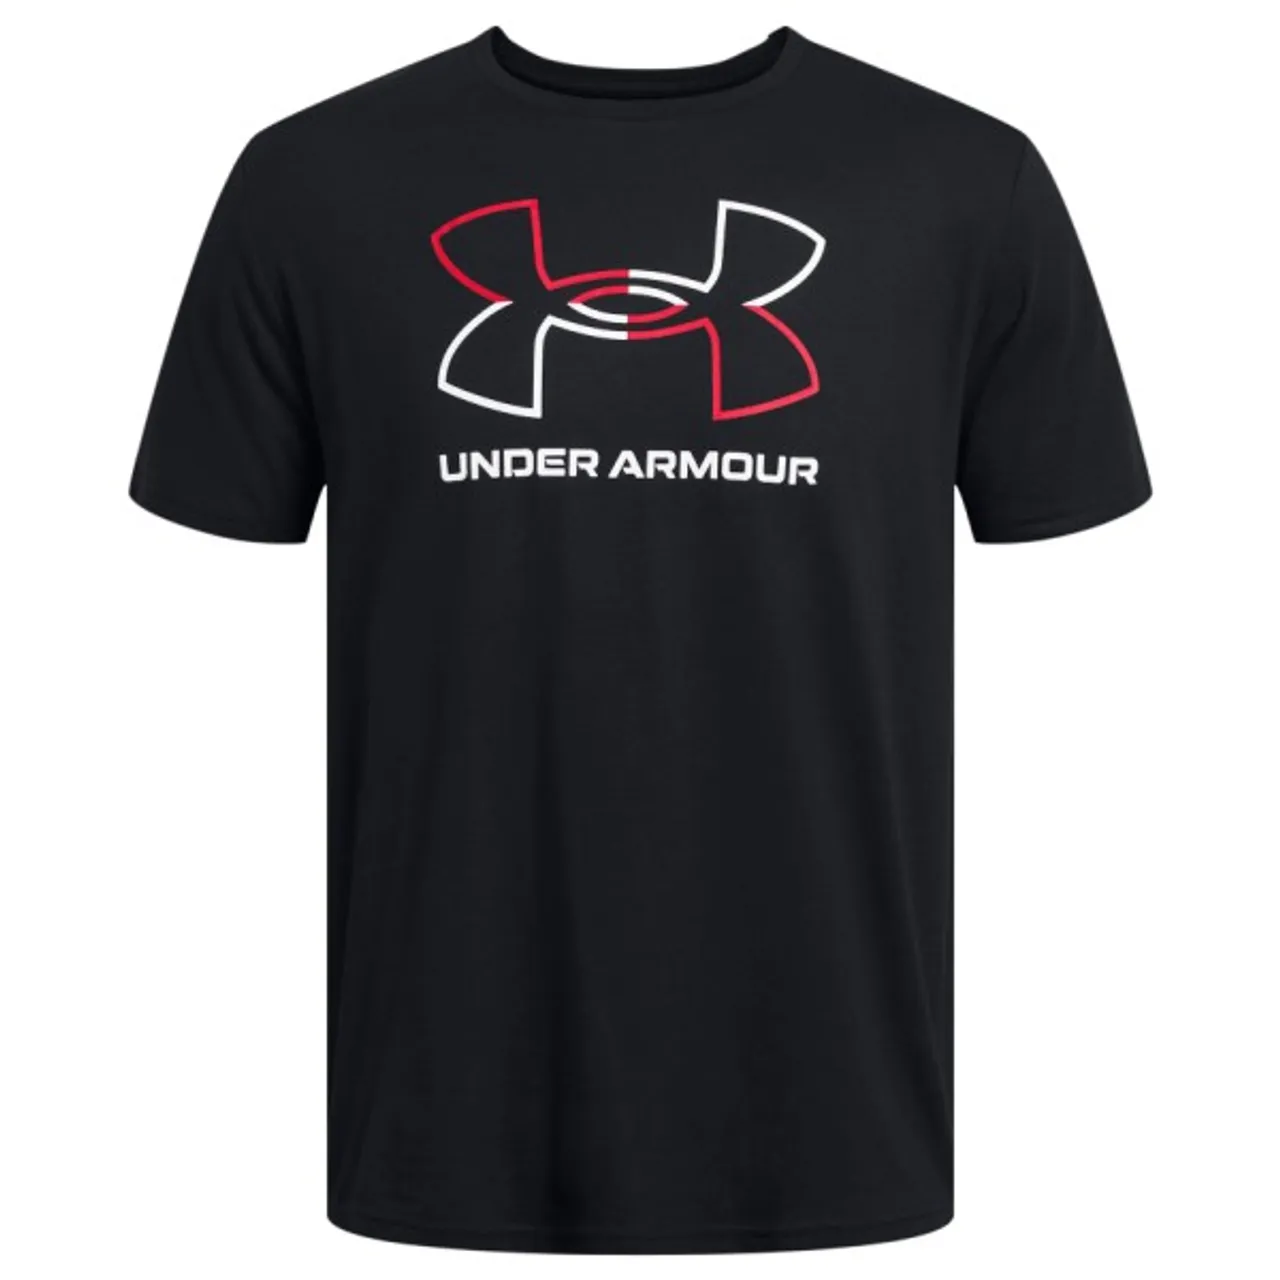 Under Armour - GL Foundation Update S/S - T-shirt